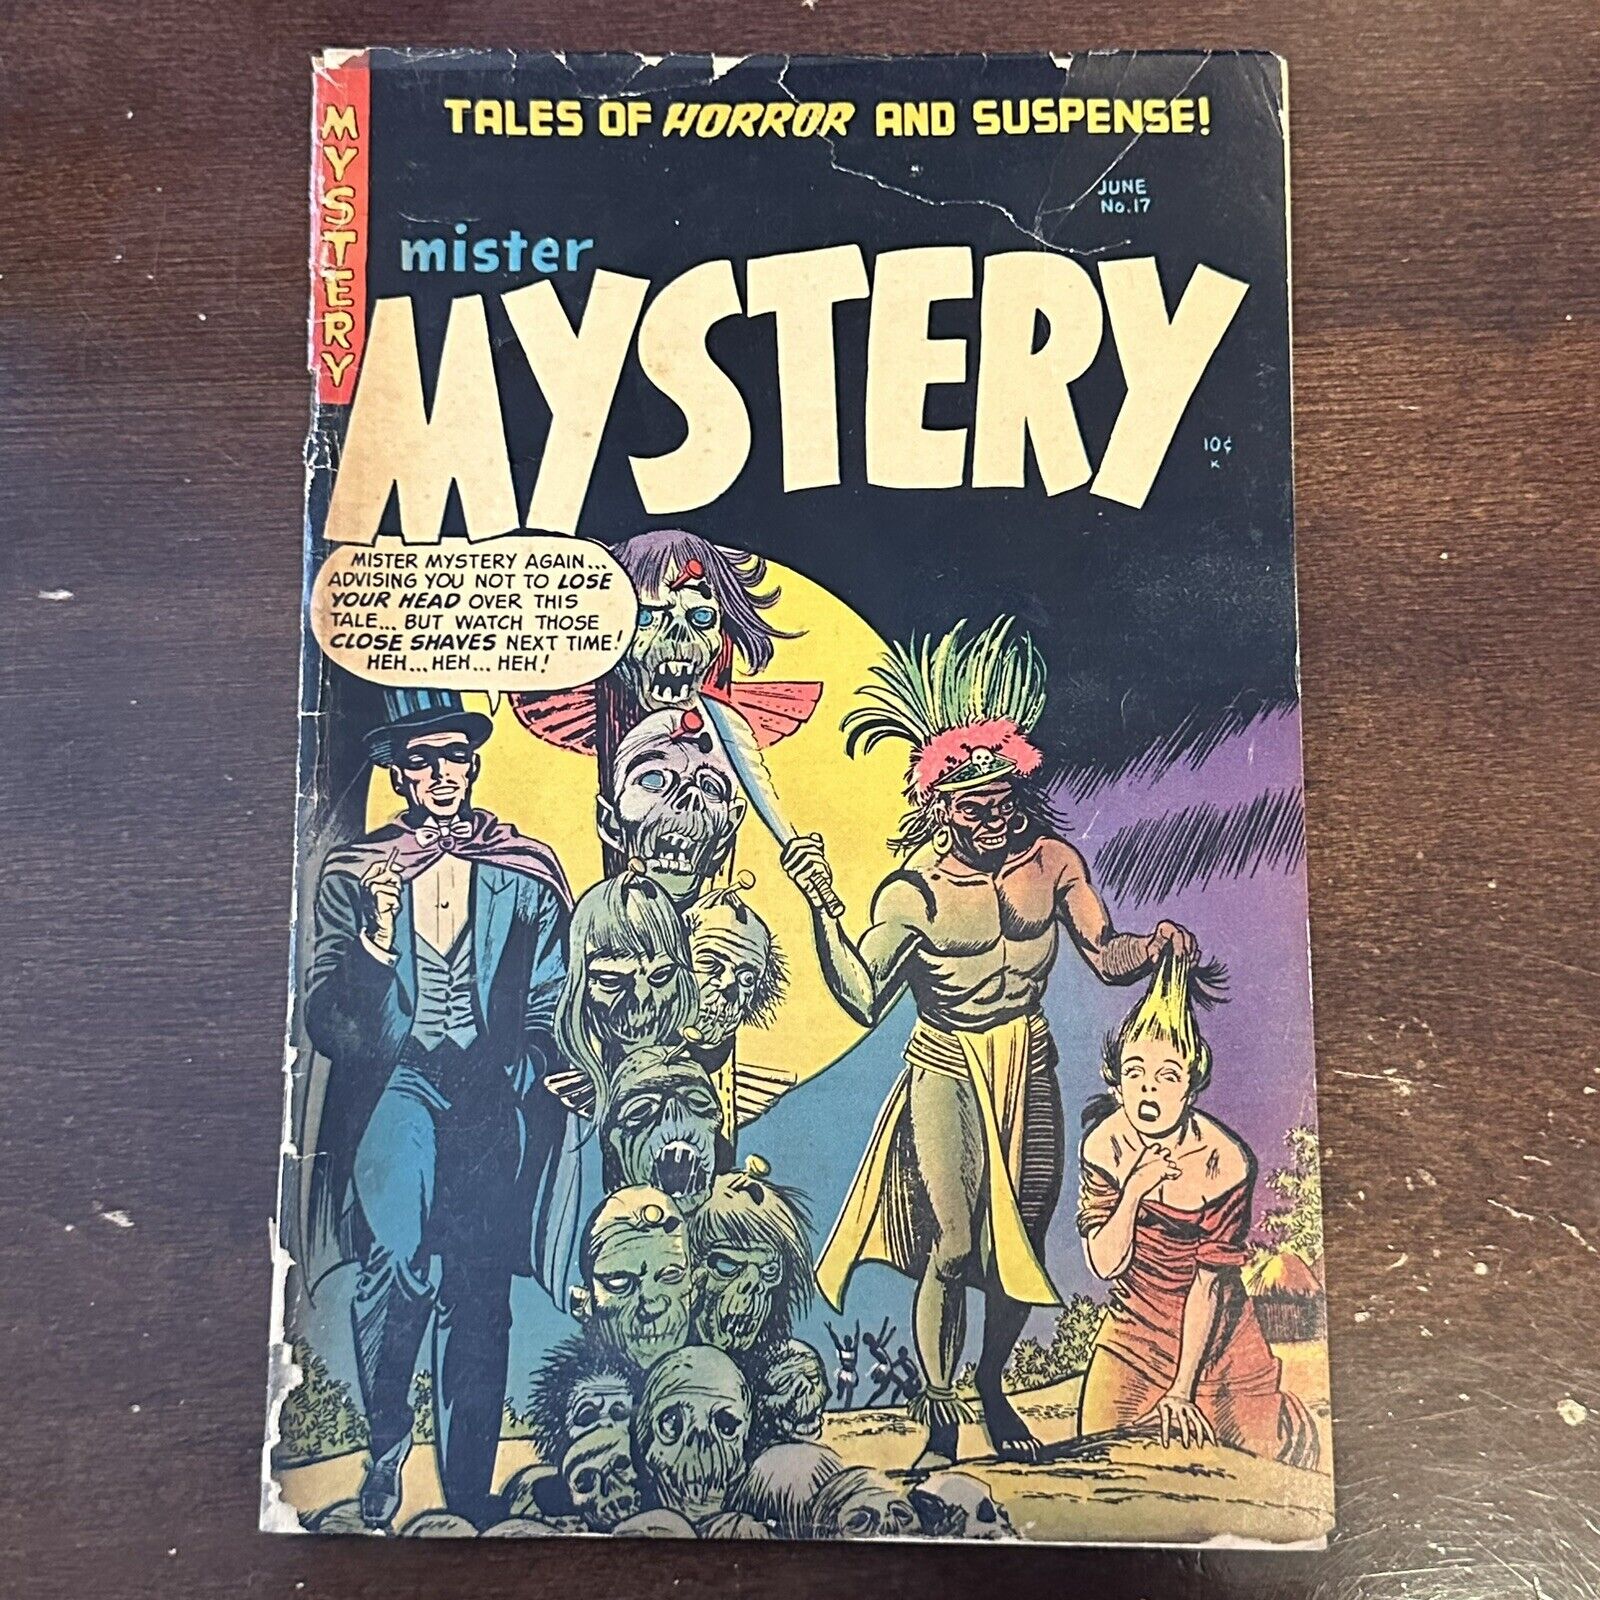 Mister Mystery #17 (1954) - PCH Golden Age Horror Beheading Cover